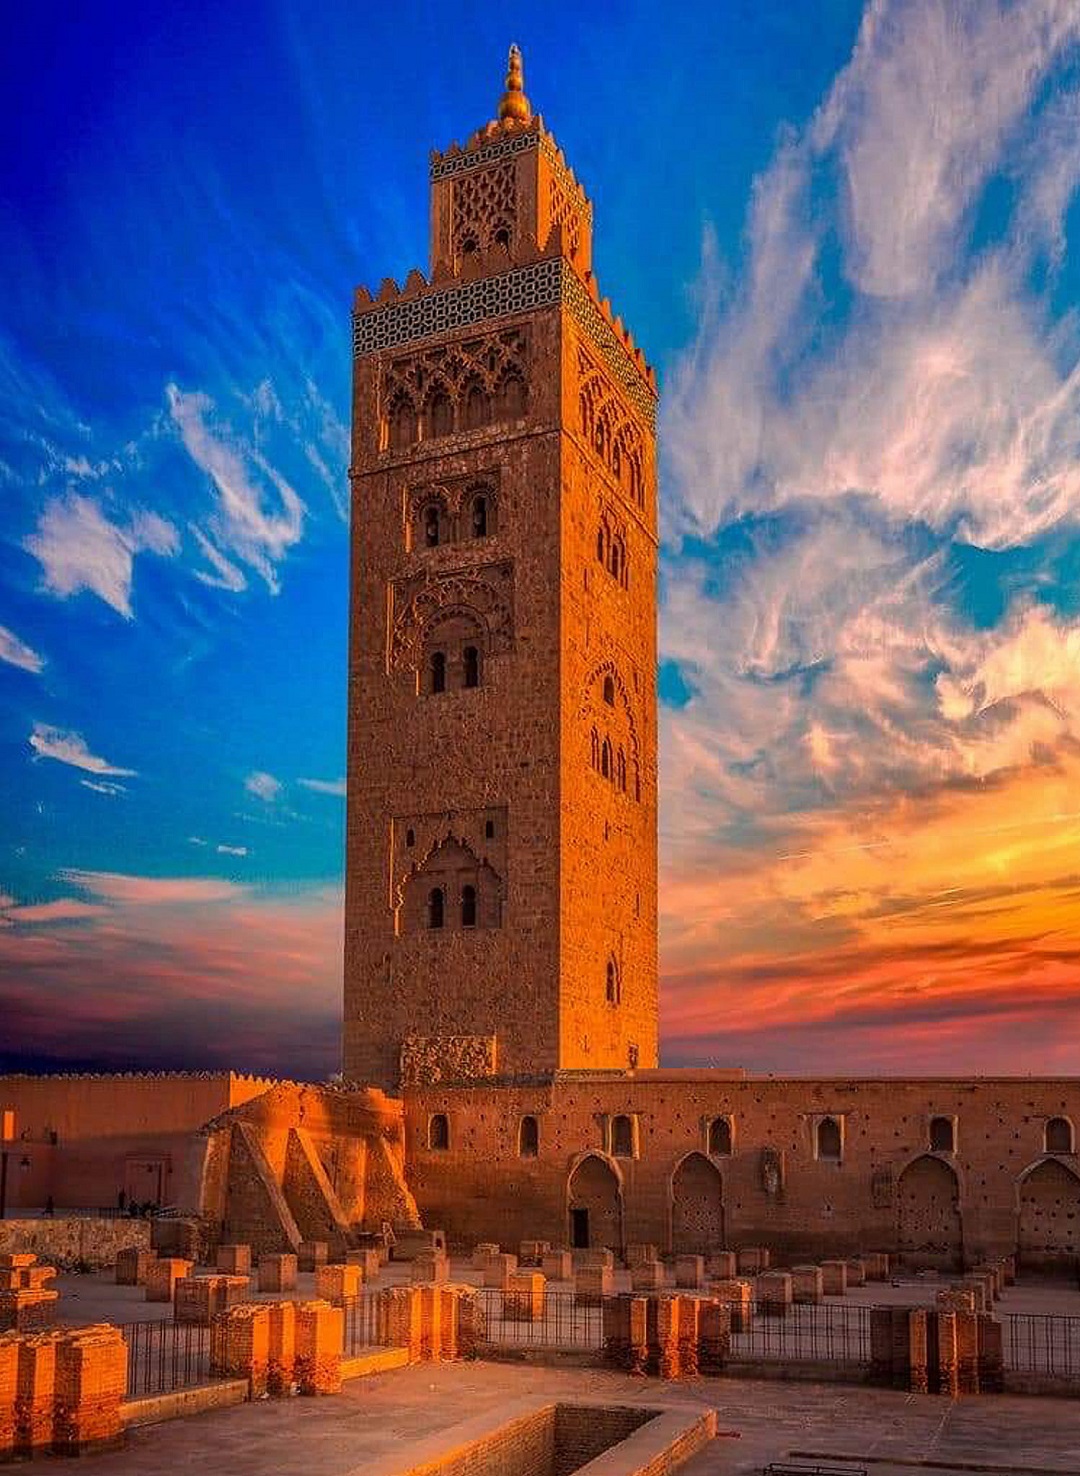 The Koutoubia Mosque Is A Cultural, Religious, And Symbolic Landmark For Marrakesh And The Kingdom Of Morocco